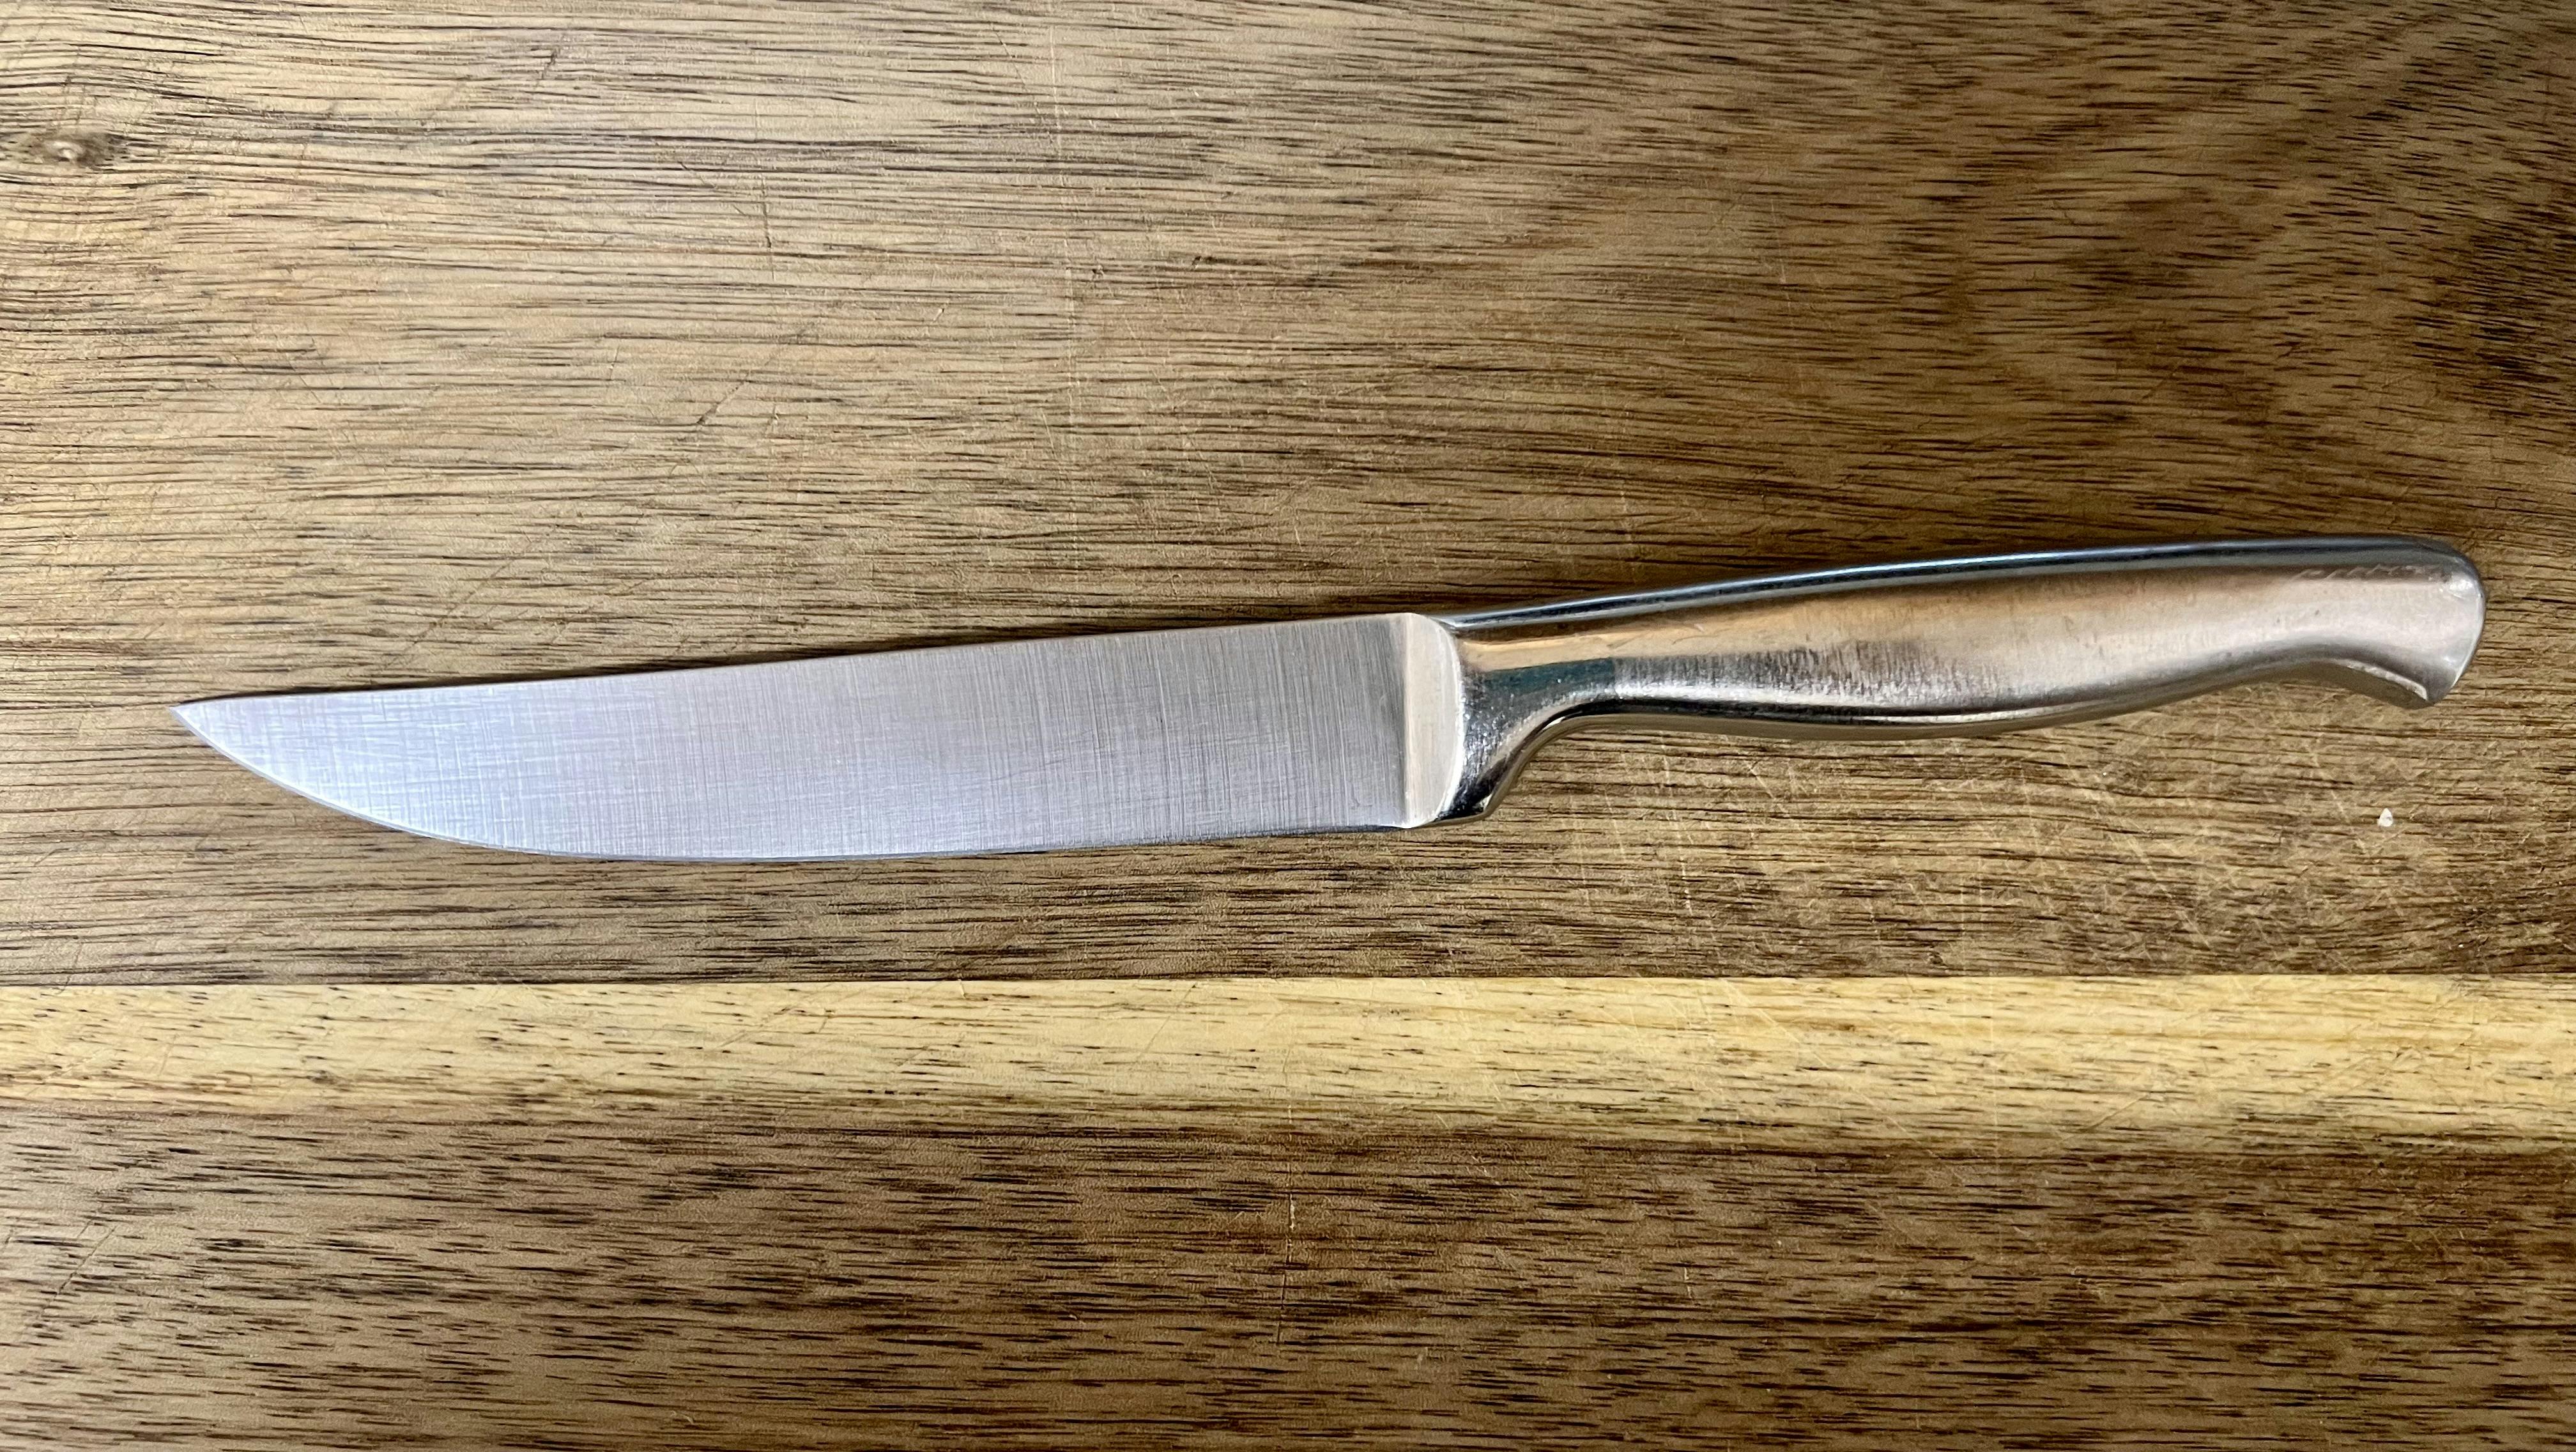 The Essential Guide to Choosing High-Quality Steak Knives